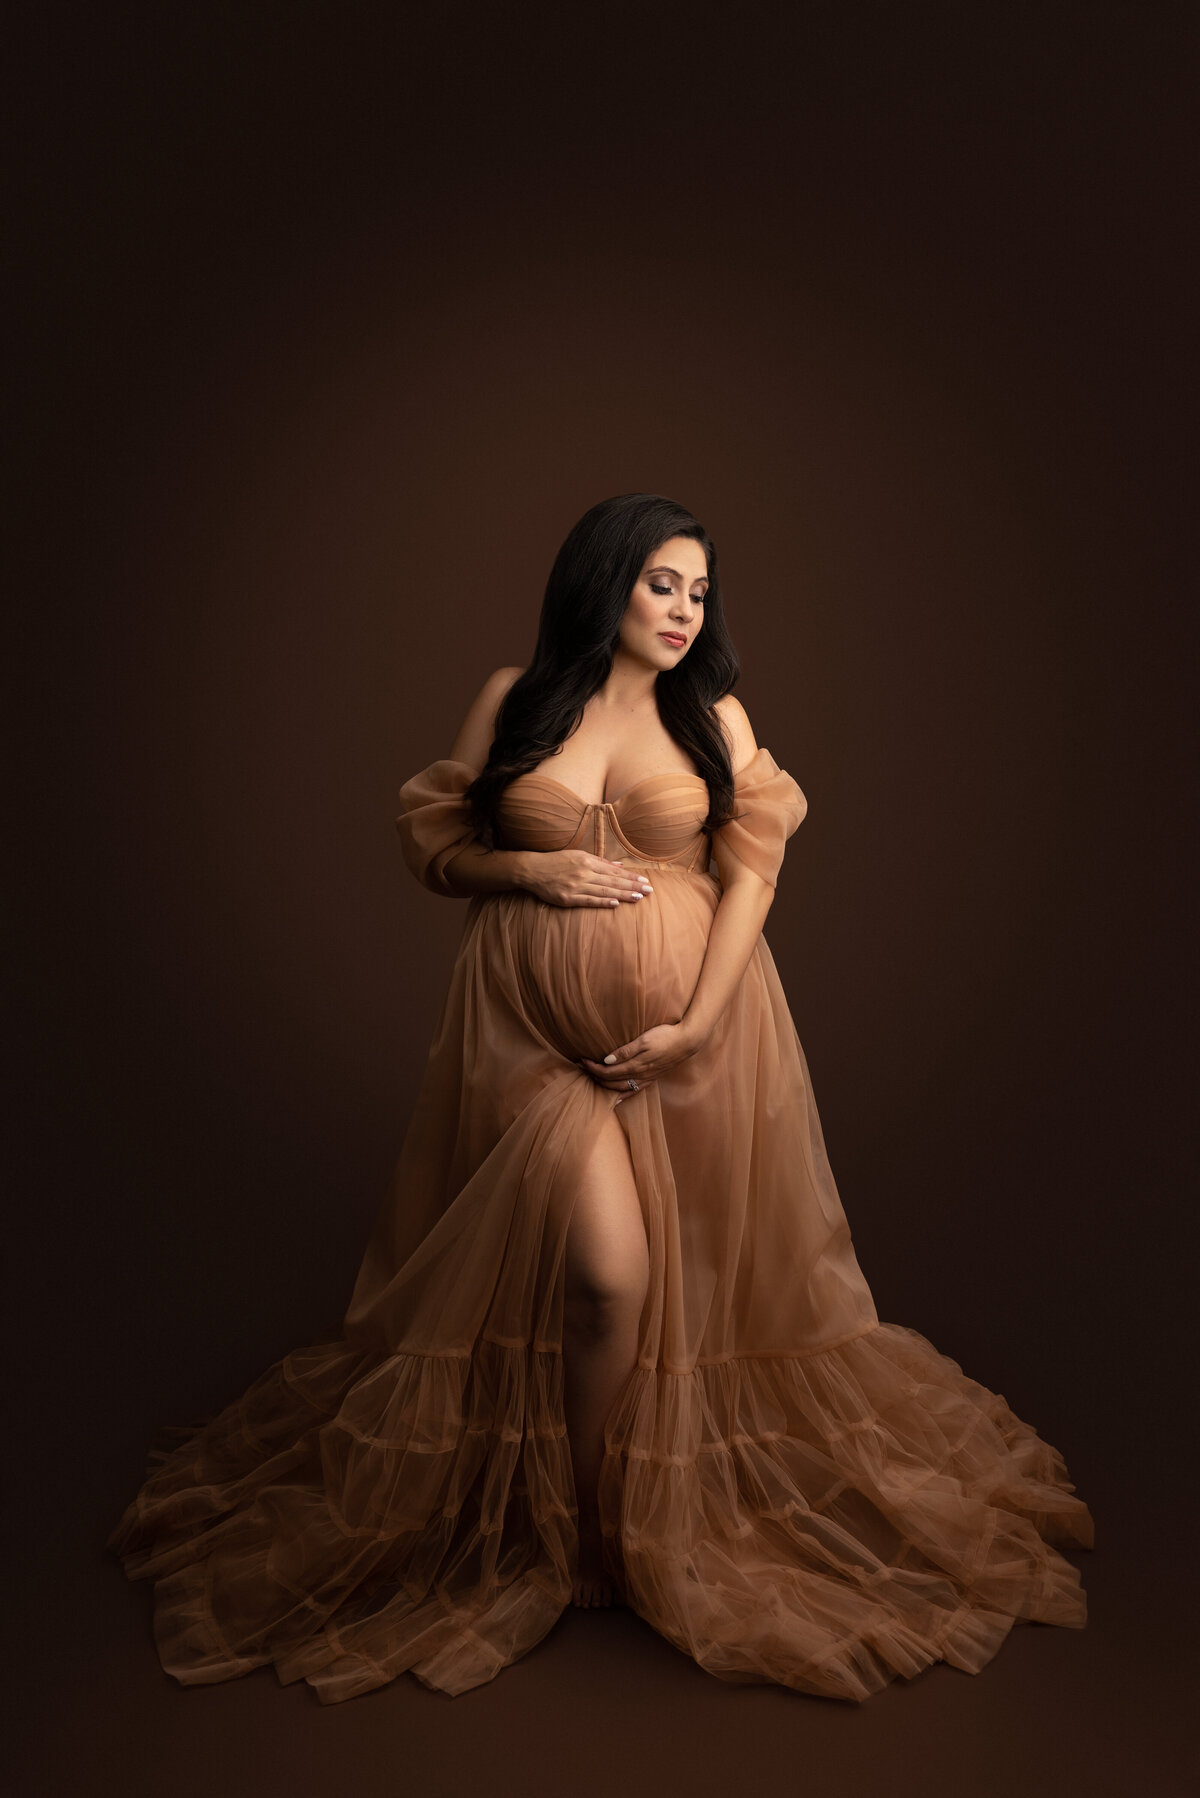 In this fine art photograph, Katie Marshall, Philadelphia's best maternity photographer, captures an expectant mom in a floor-length dark taupe organza maternity gown. The gown flows beautifully around her with a bodice resembling a corset. One hand is under her bump, the other is overtop of it. The woman is looking over her shoulder in the direction of the her elbow with her eyes closed and a peaceful expression.